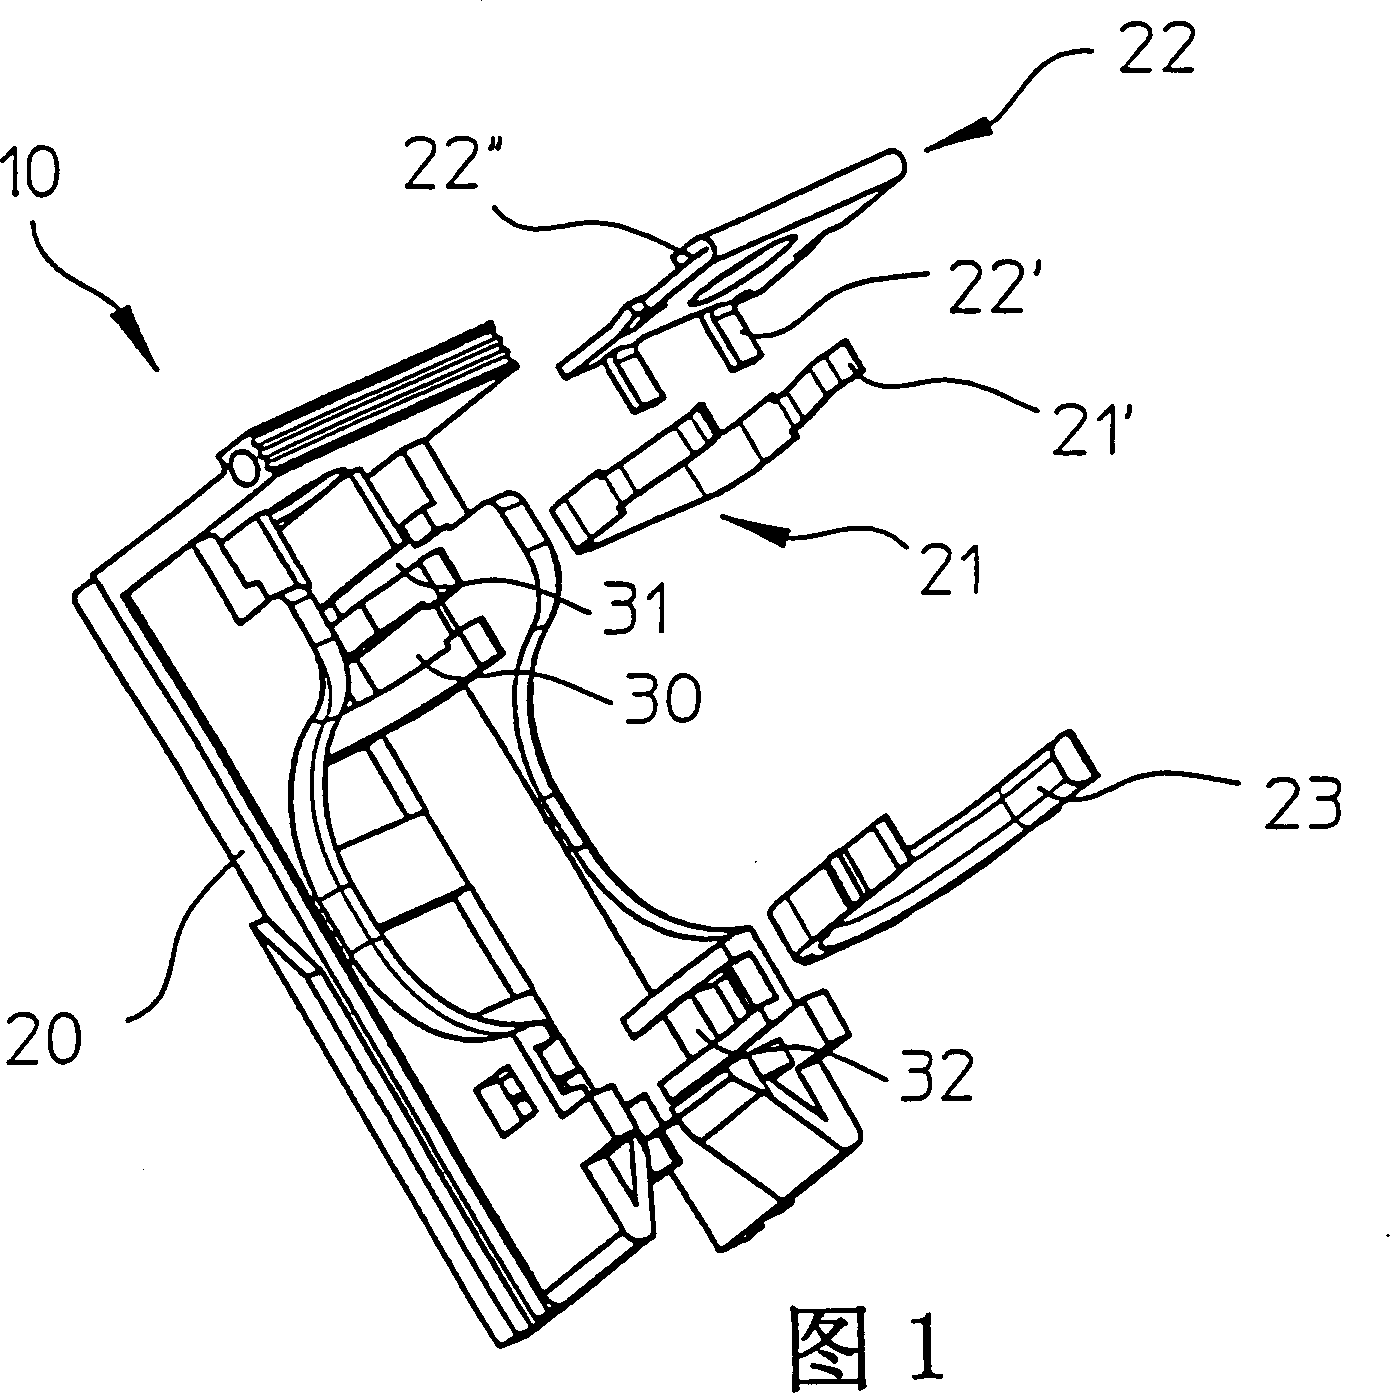 Electric appliance switch comprising a fuse seat